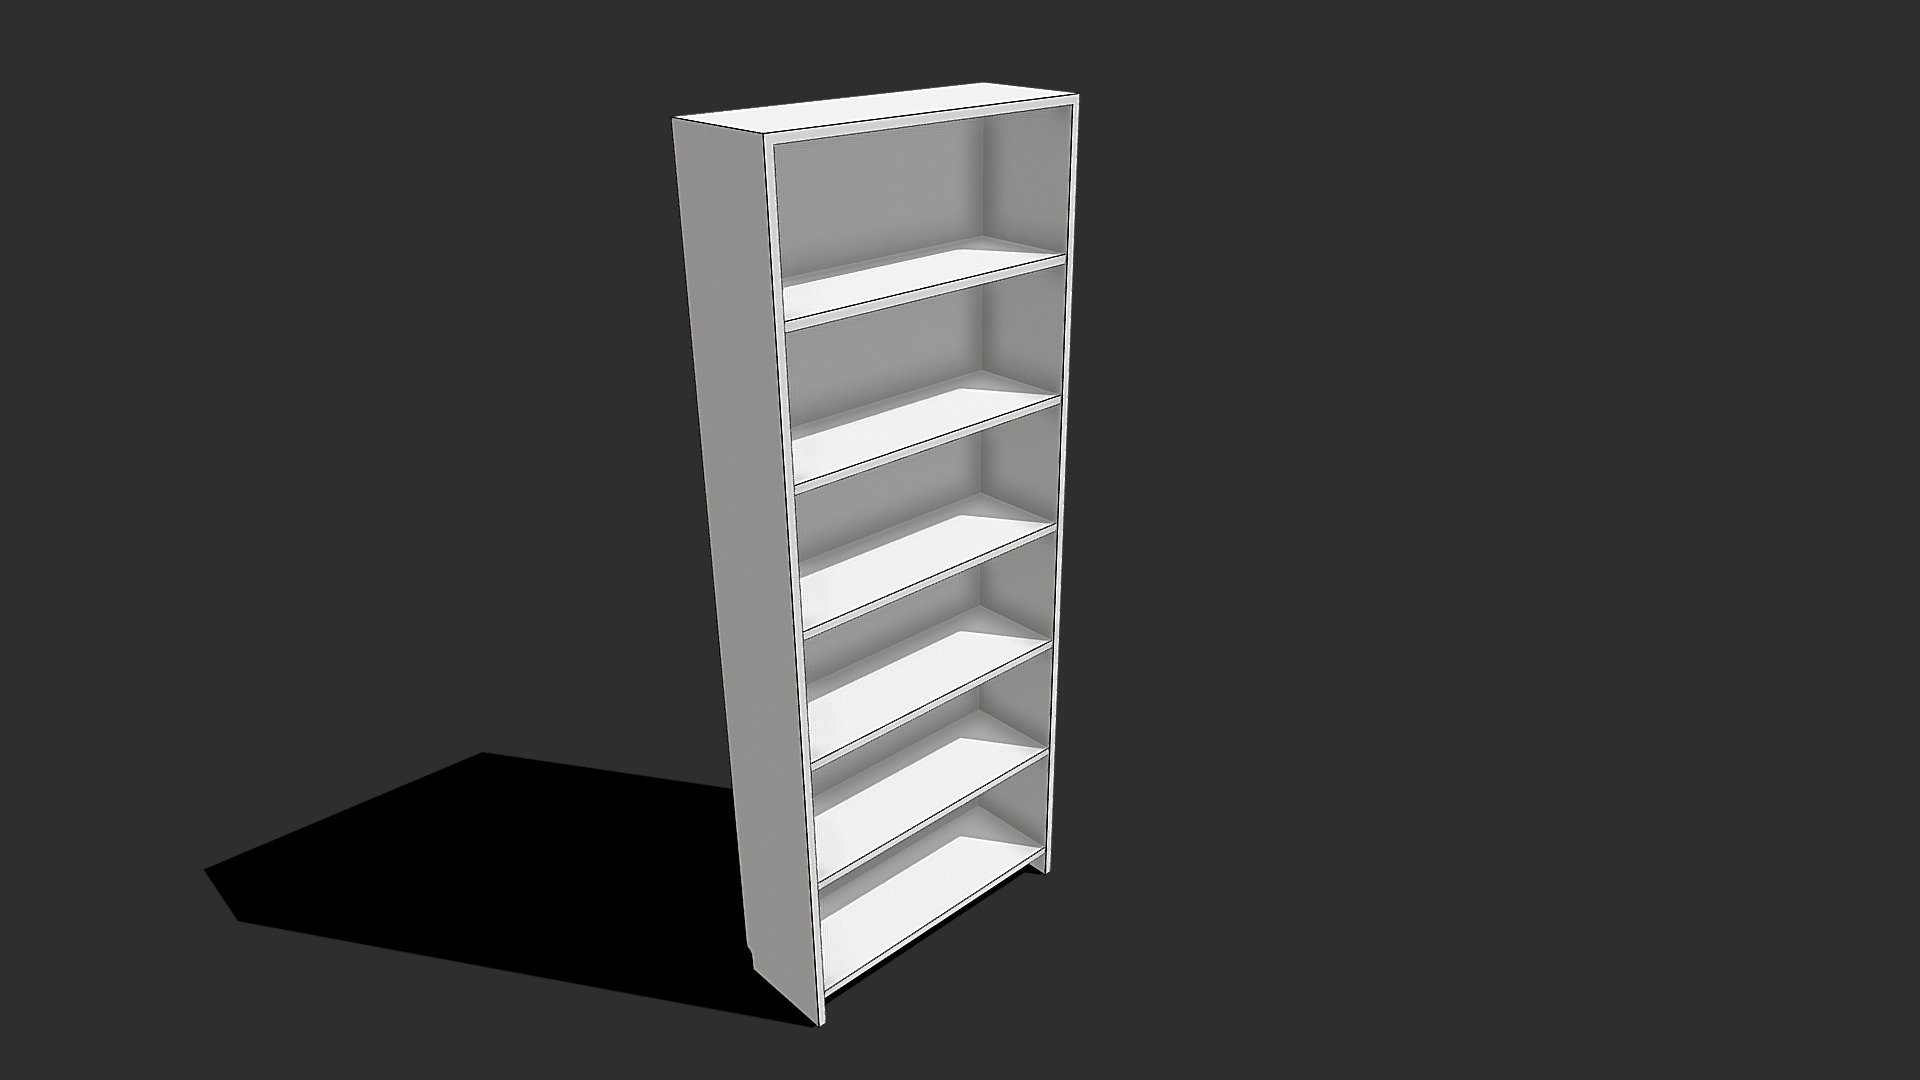 Ikea Billy bookcase this model is made with official ikea dimensions

model : 80x28 cm height : 202 cm

1 to 1 in dimensions all formats available good for house design rendering interior design very clean and accurate model

&lt; Disclaimer this is not from the official Ikea company &gt;

questions/requests : abrorcurrents@gmail.com

discord : Abror #3536 - Ikea Billy bookcase - Download Free 3D model by Art_bor 3d model